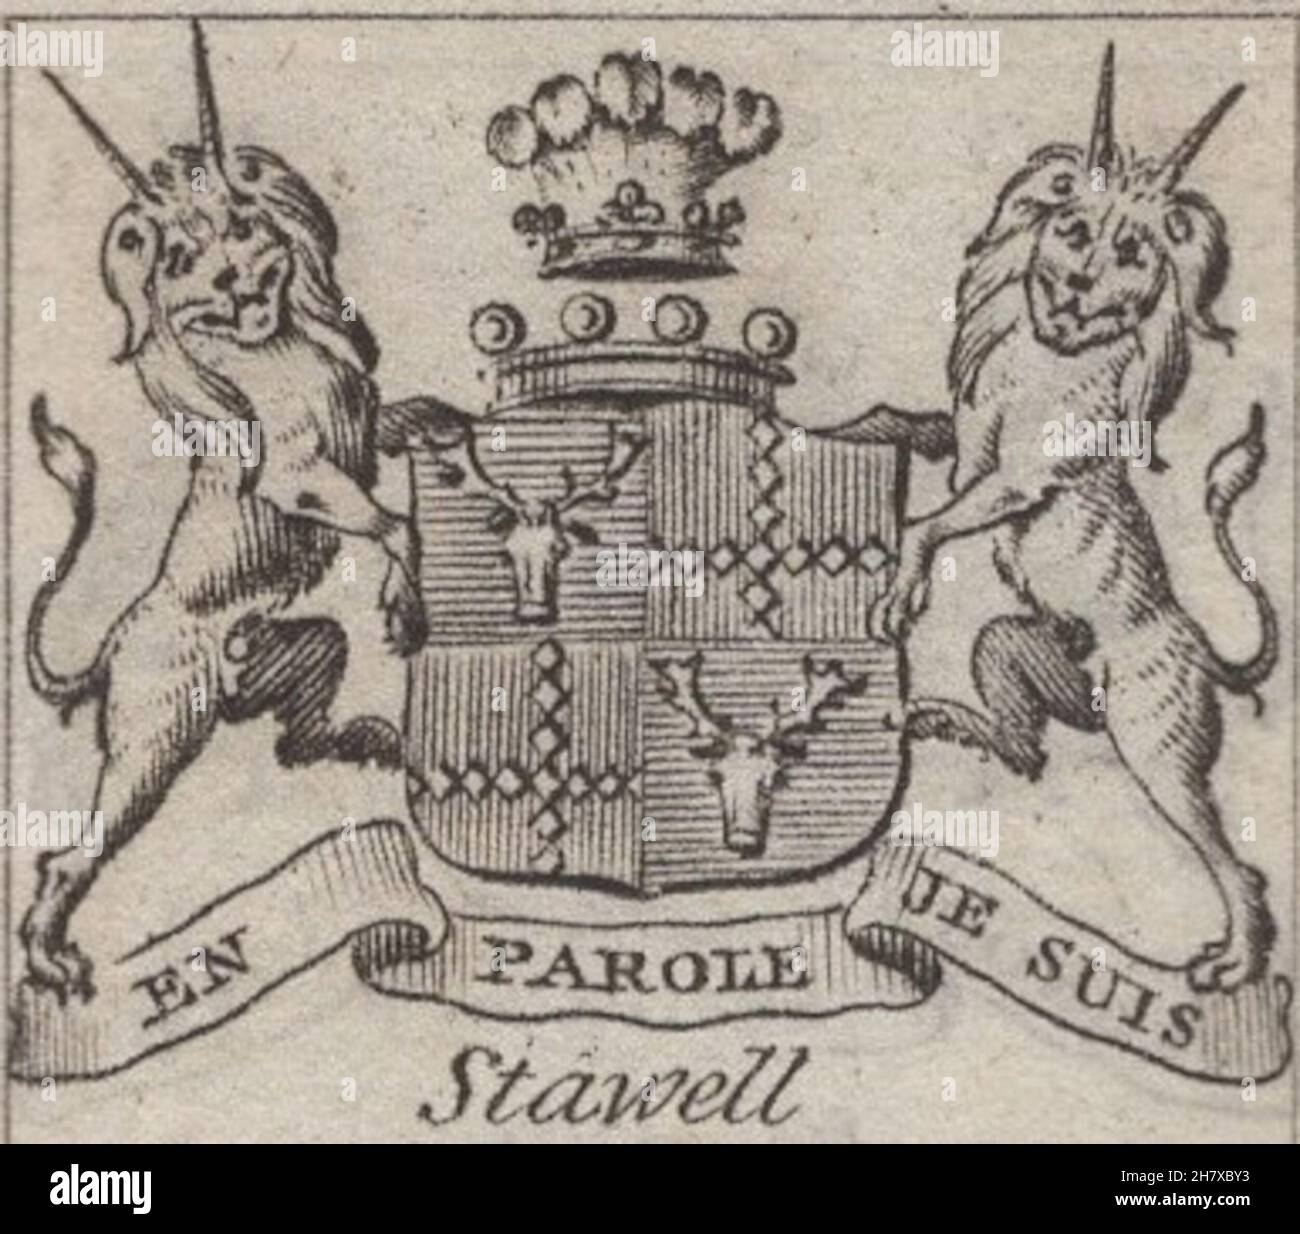 antique 18th century engraving heraldy coats of arms, English Barons, Motto / slogan:En Parole Je Suis. Stawell. by Woodman & Mutlow fc russel co circa 1780s Source: original engravings from  the annual almanach book. Stock Photo